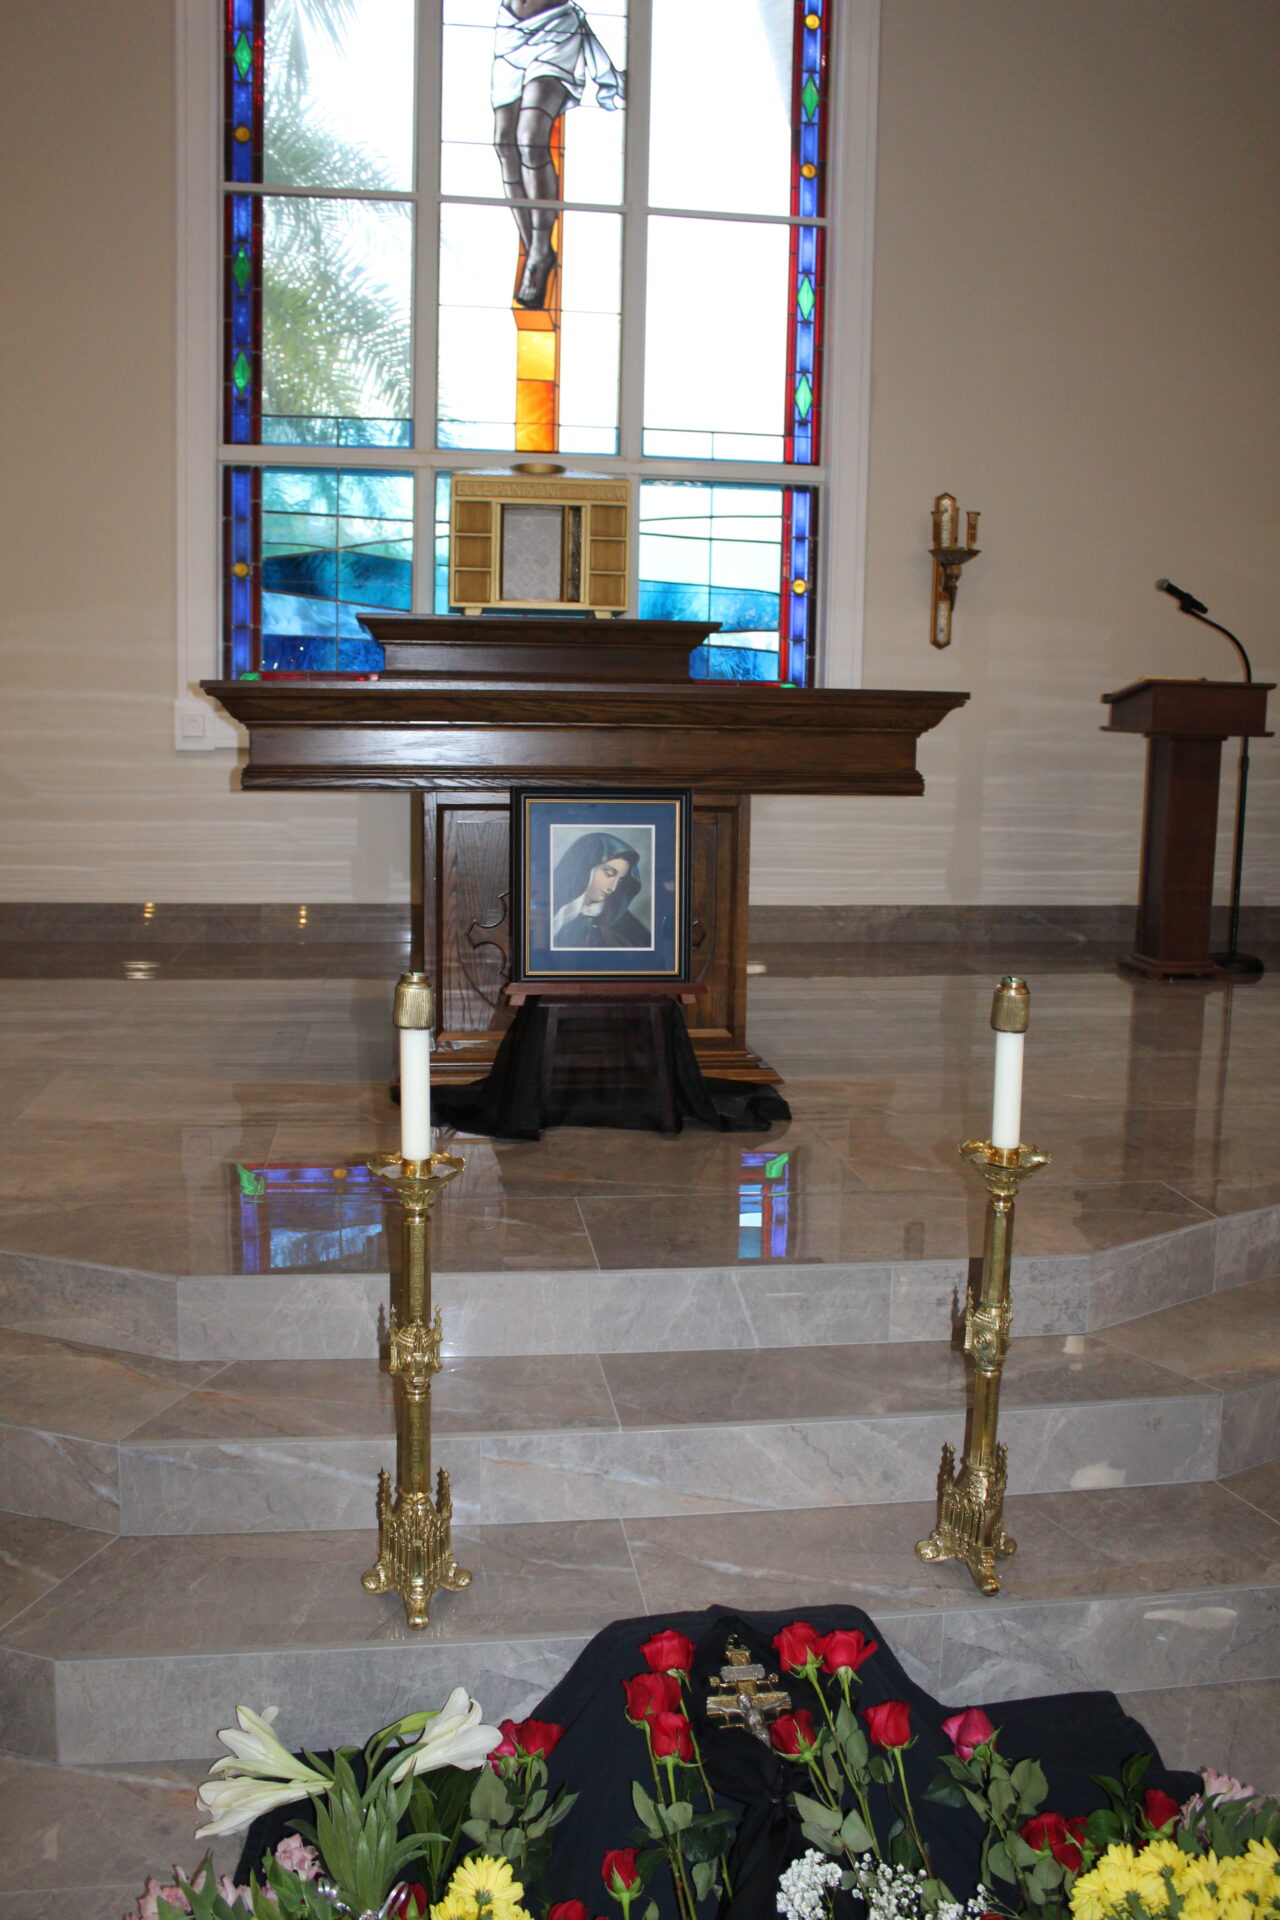 Two gold candle holders in front of the altar